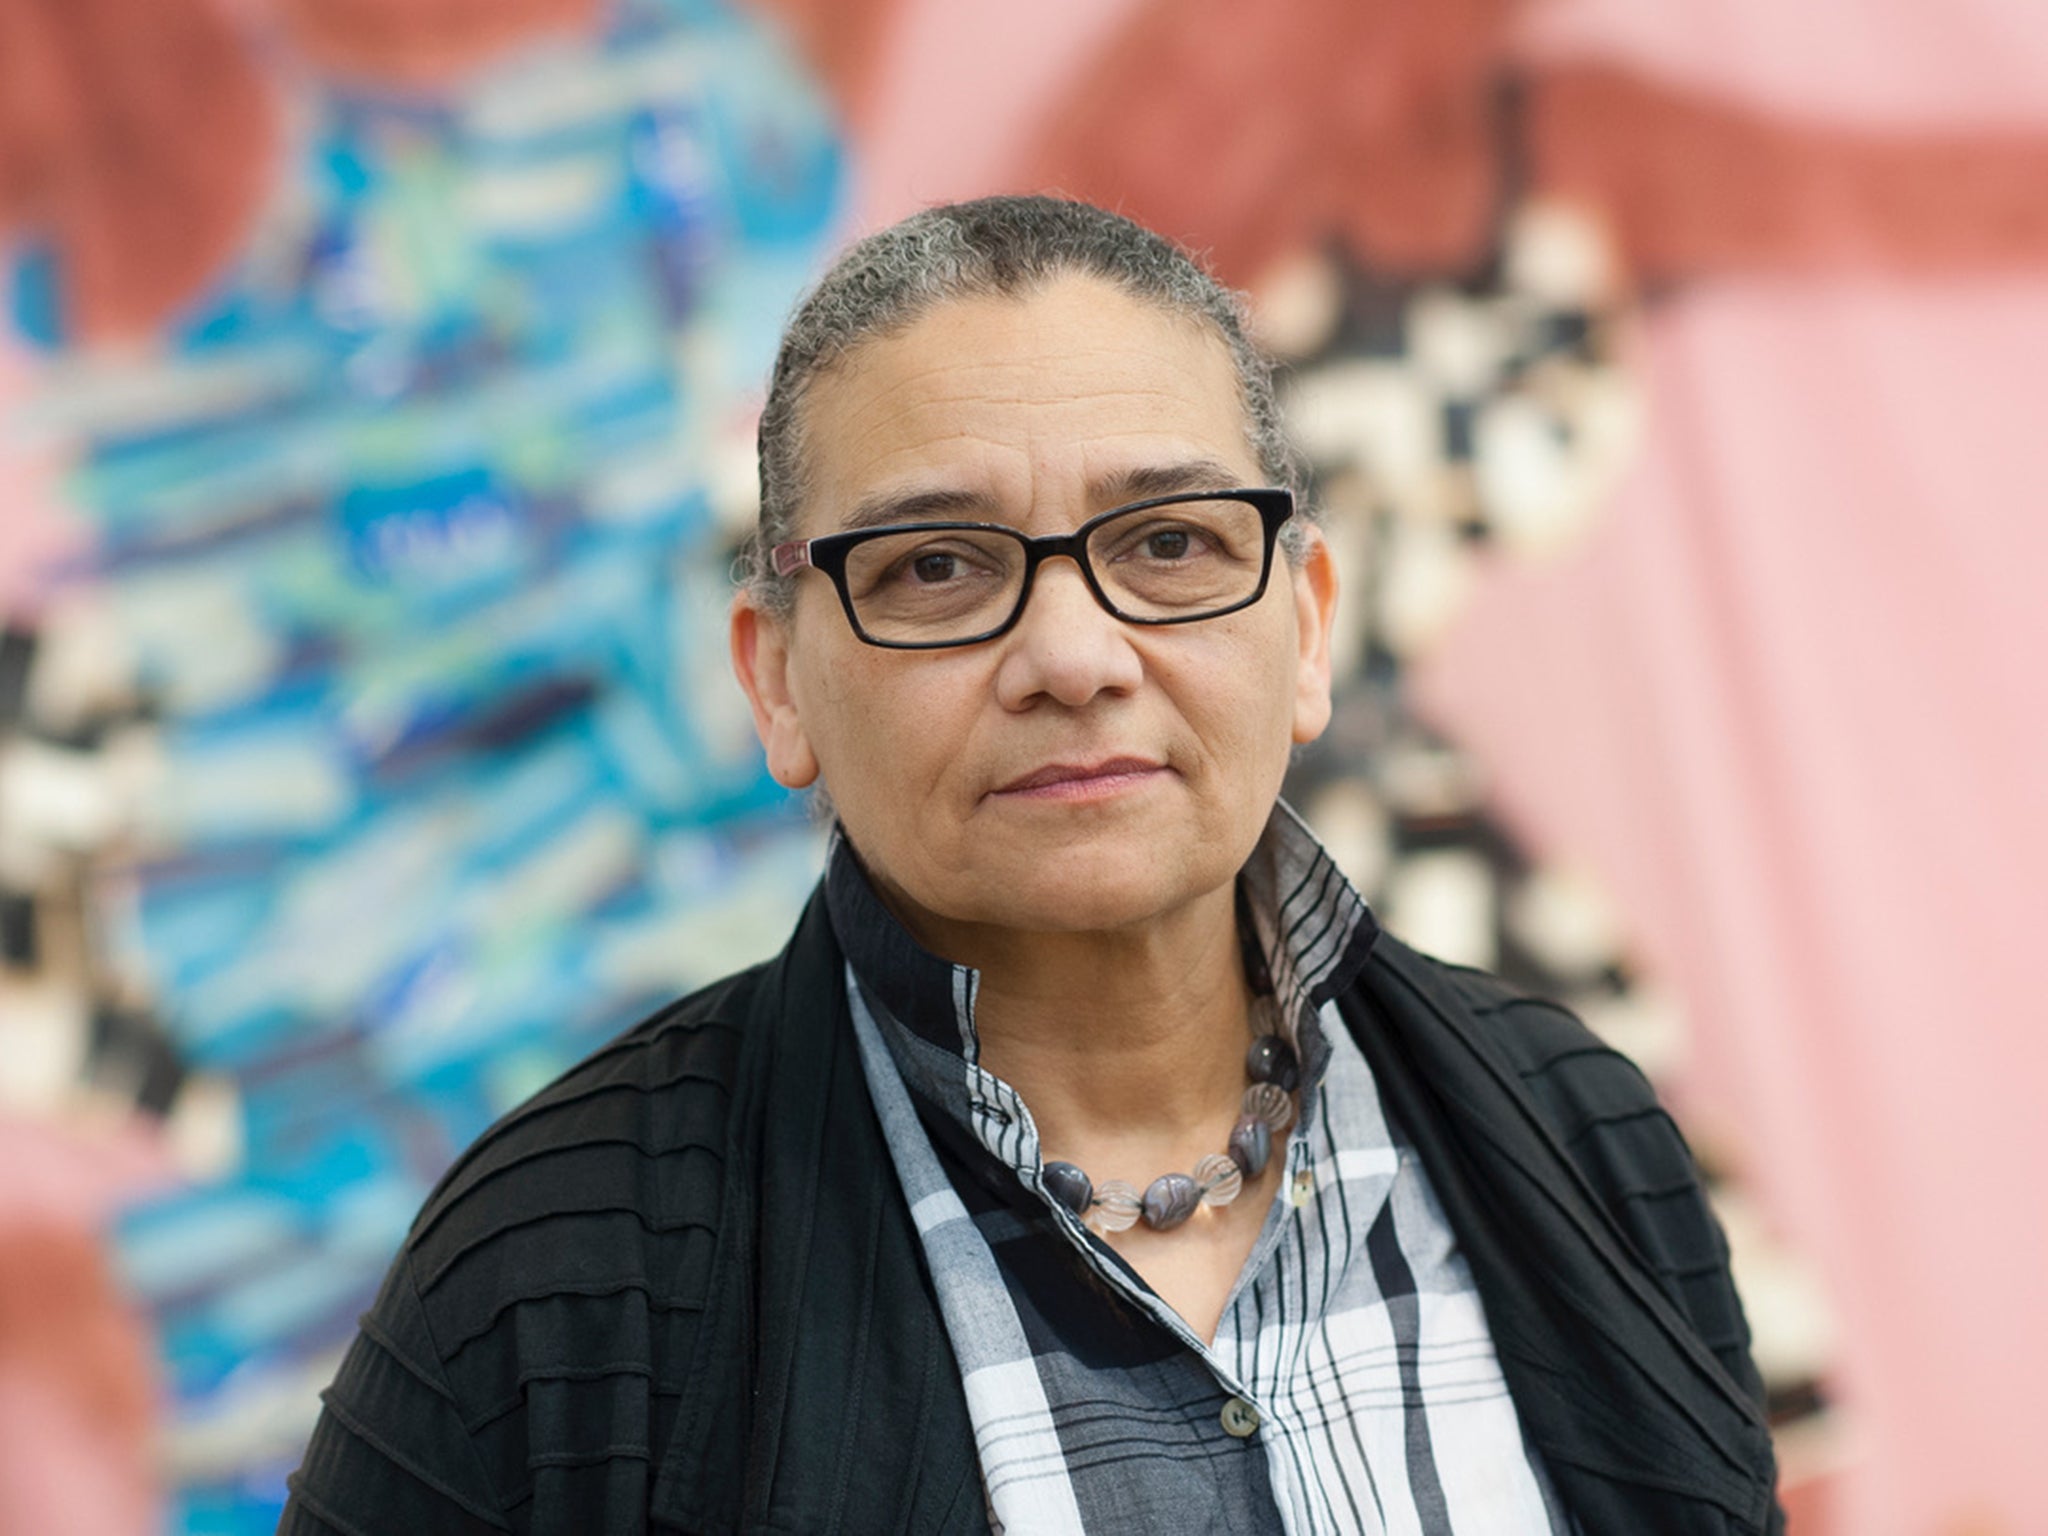 Lubaina Himid, winner of this year’s Turner Prize